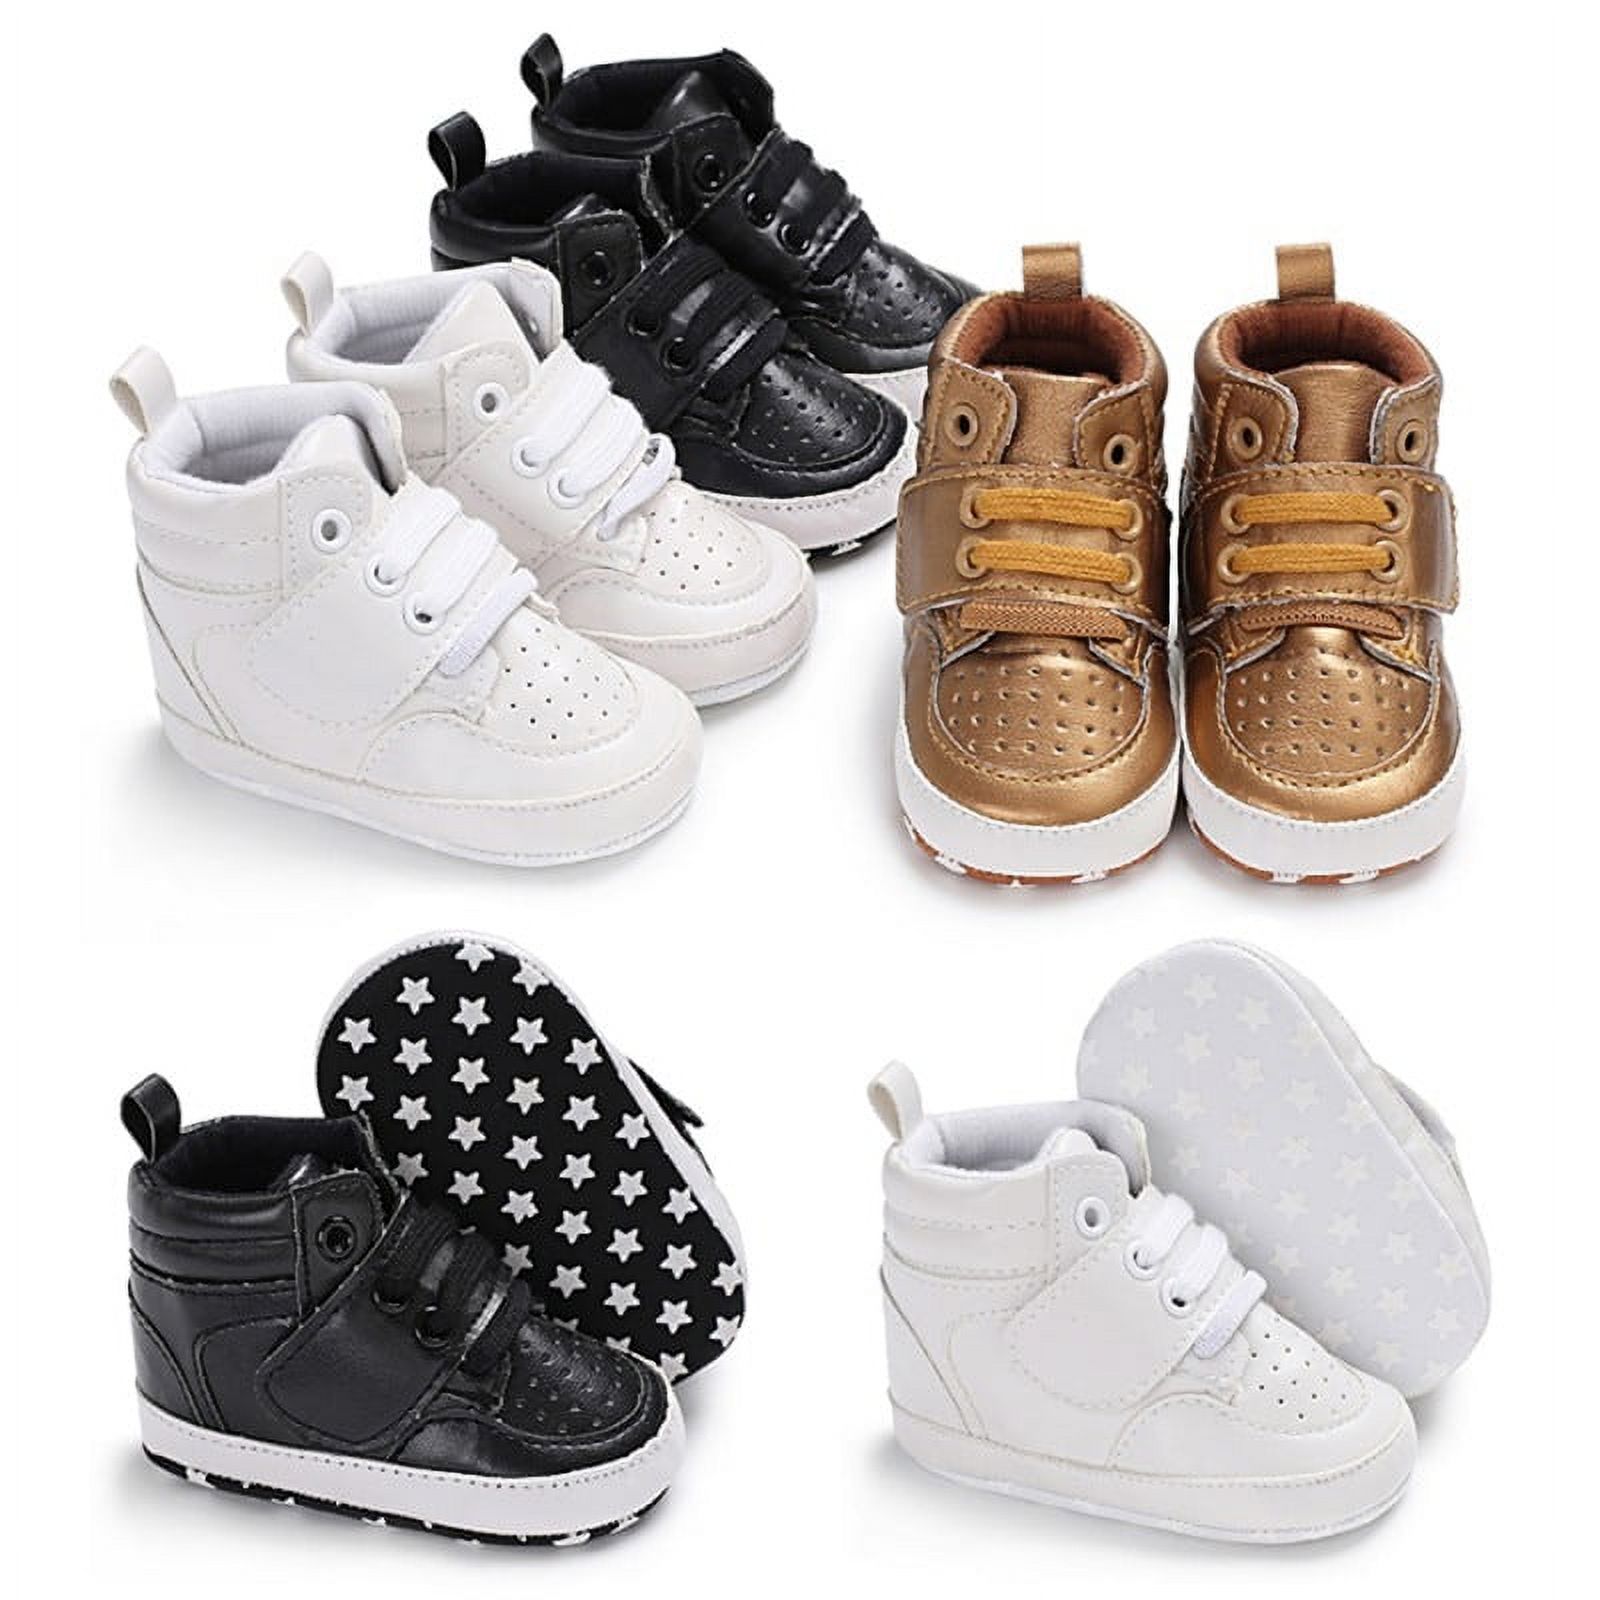 zhongxinda 0-18M Newly Fashion First Walkers Baby Boys Casual Shoes Infant Newborn Kids Soft Toddler Shoes Baby Shoes - image 2 of 6